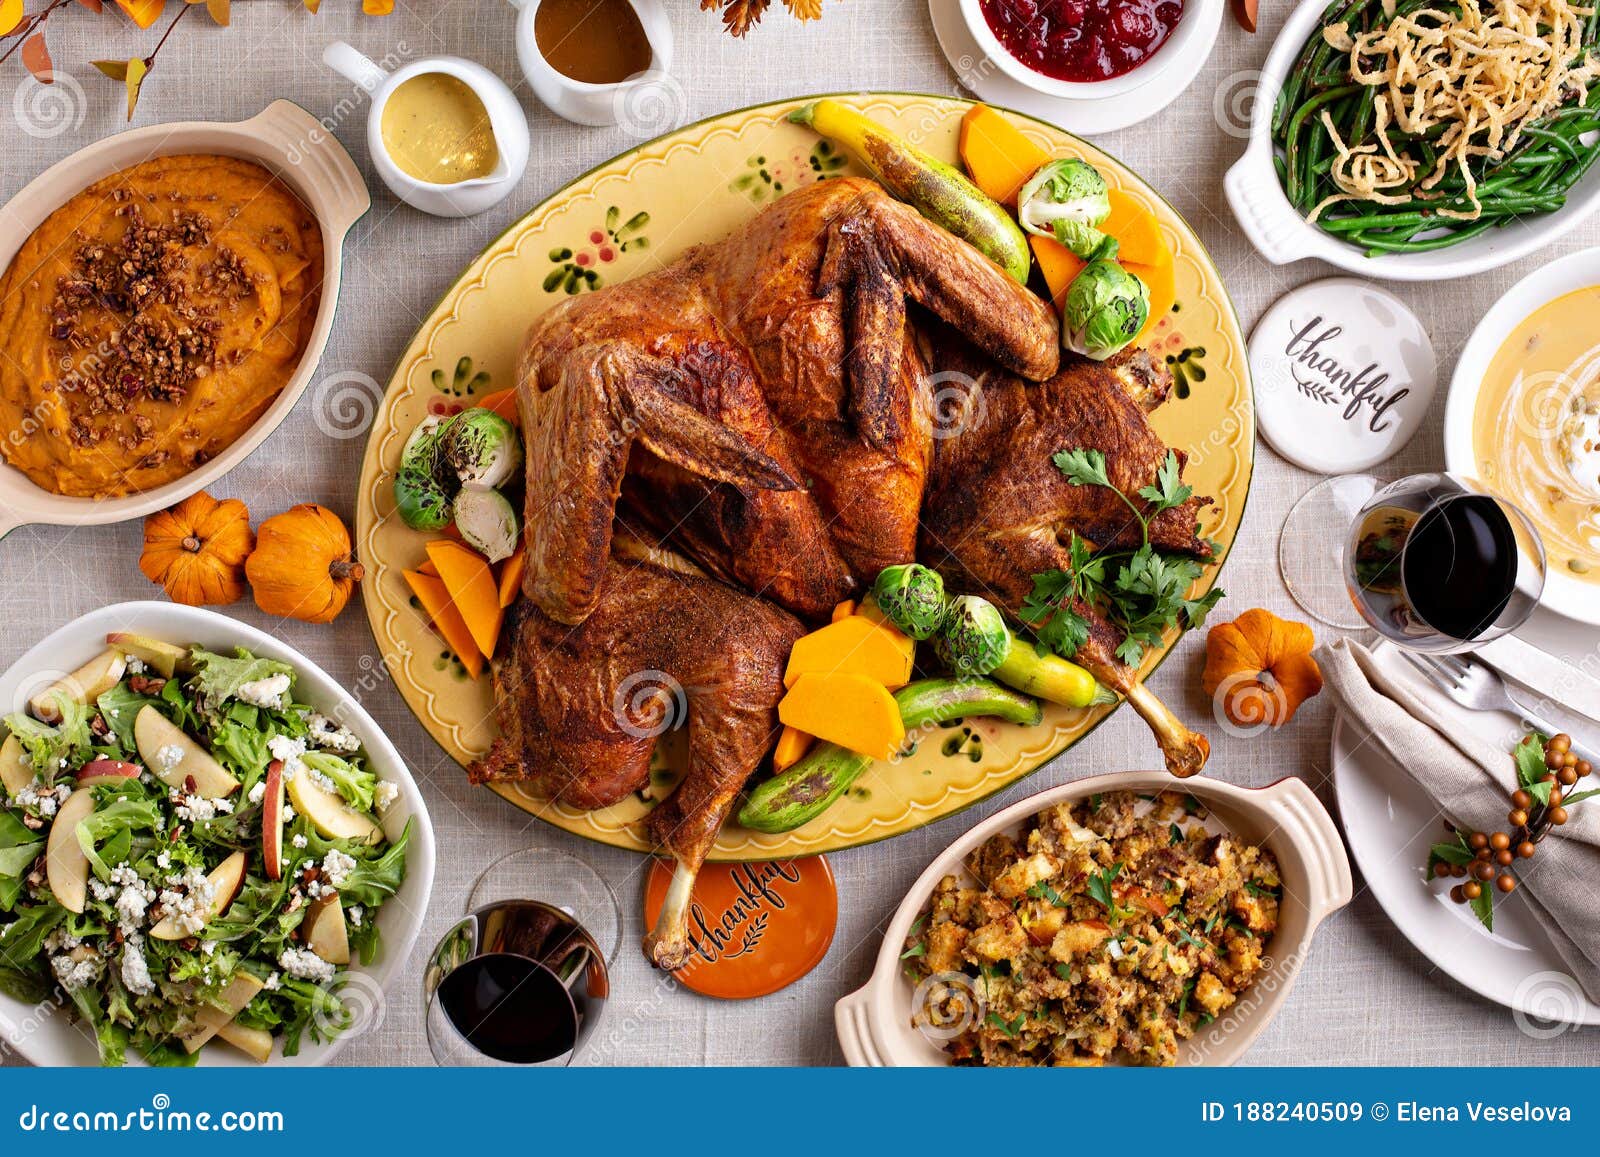 Thanksgiving Dinner With Whole Turkey And Sides Stock Image - Image of gourmet, holiday: 188240509